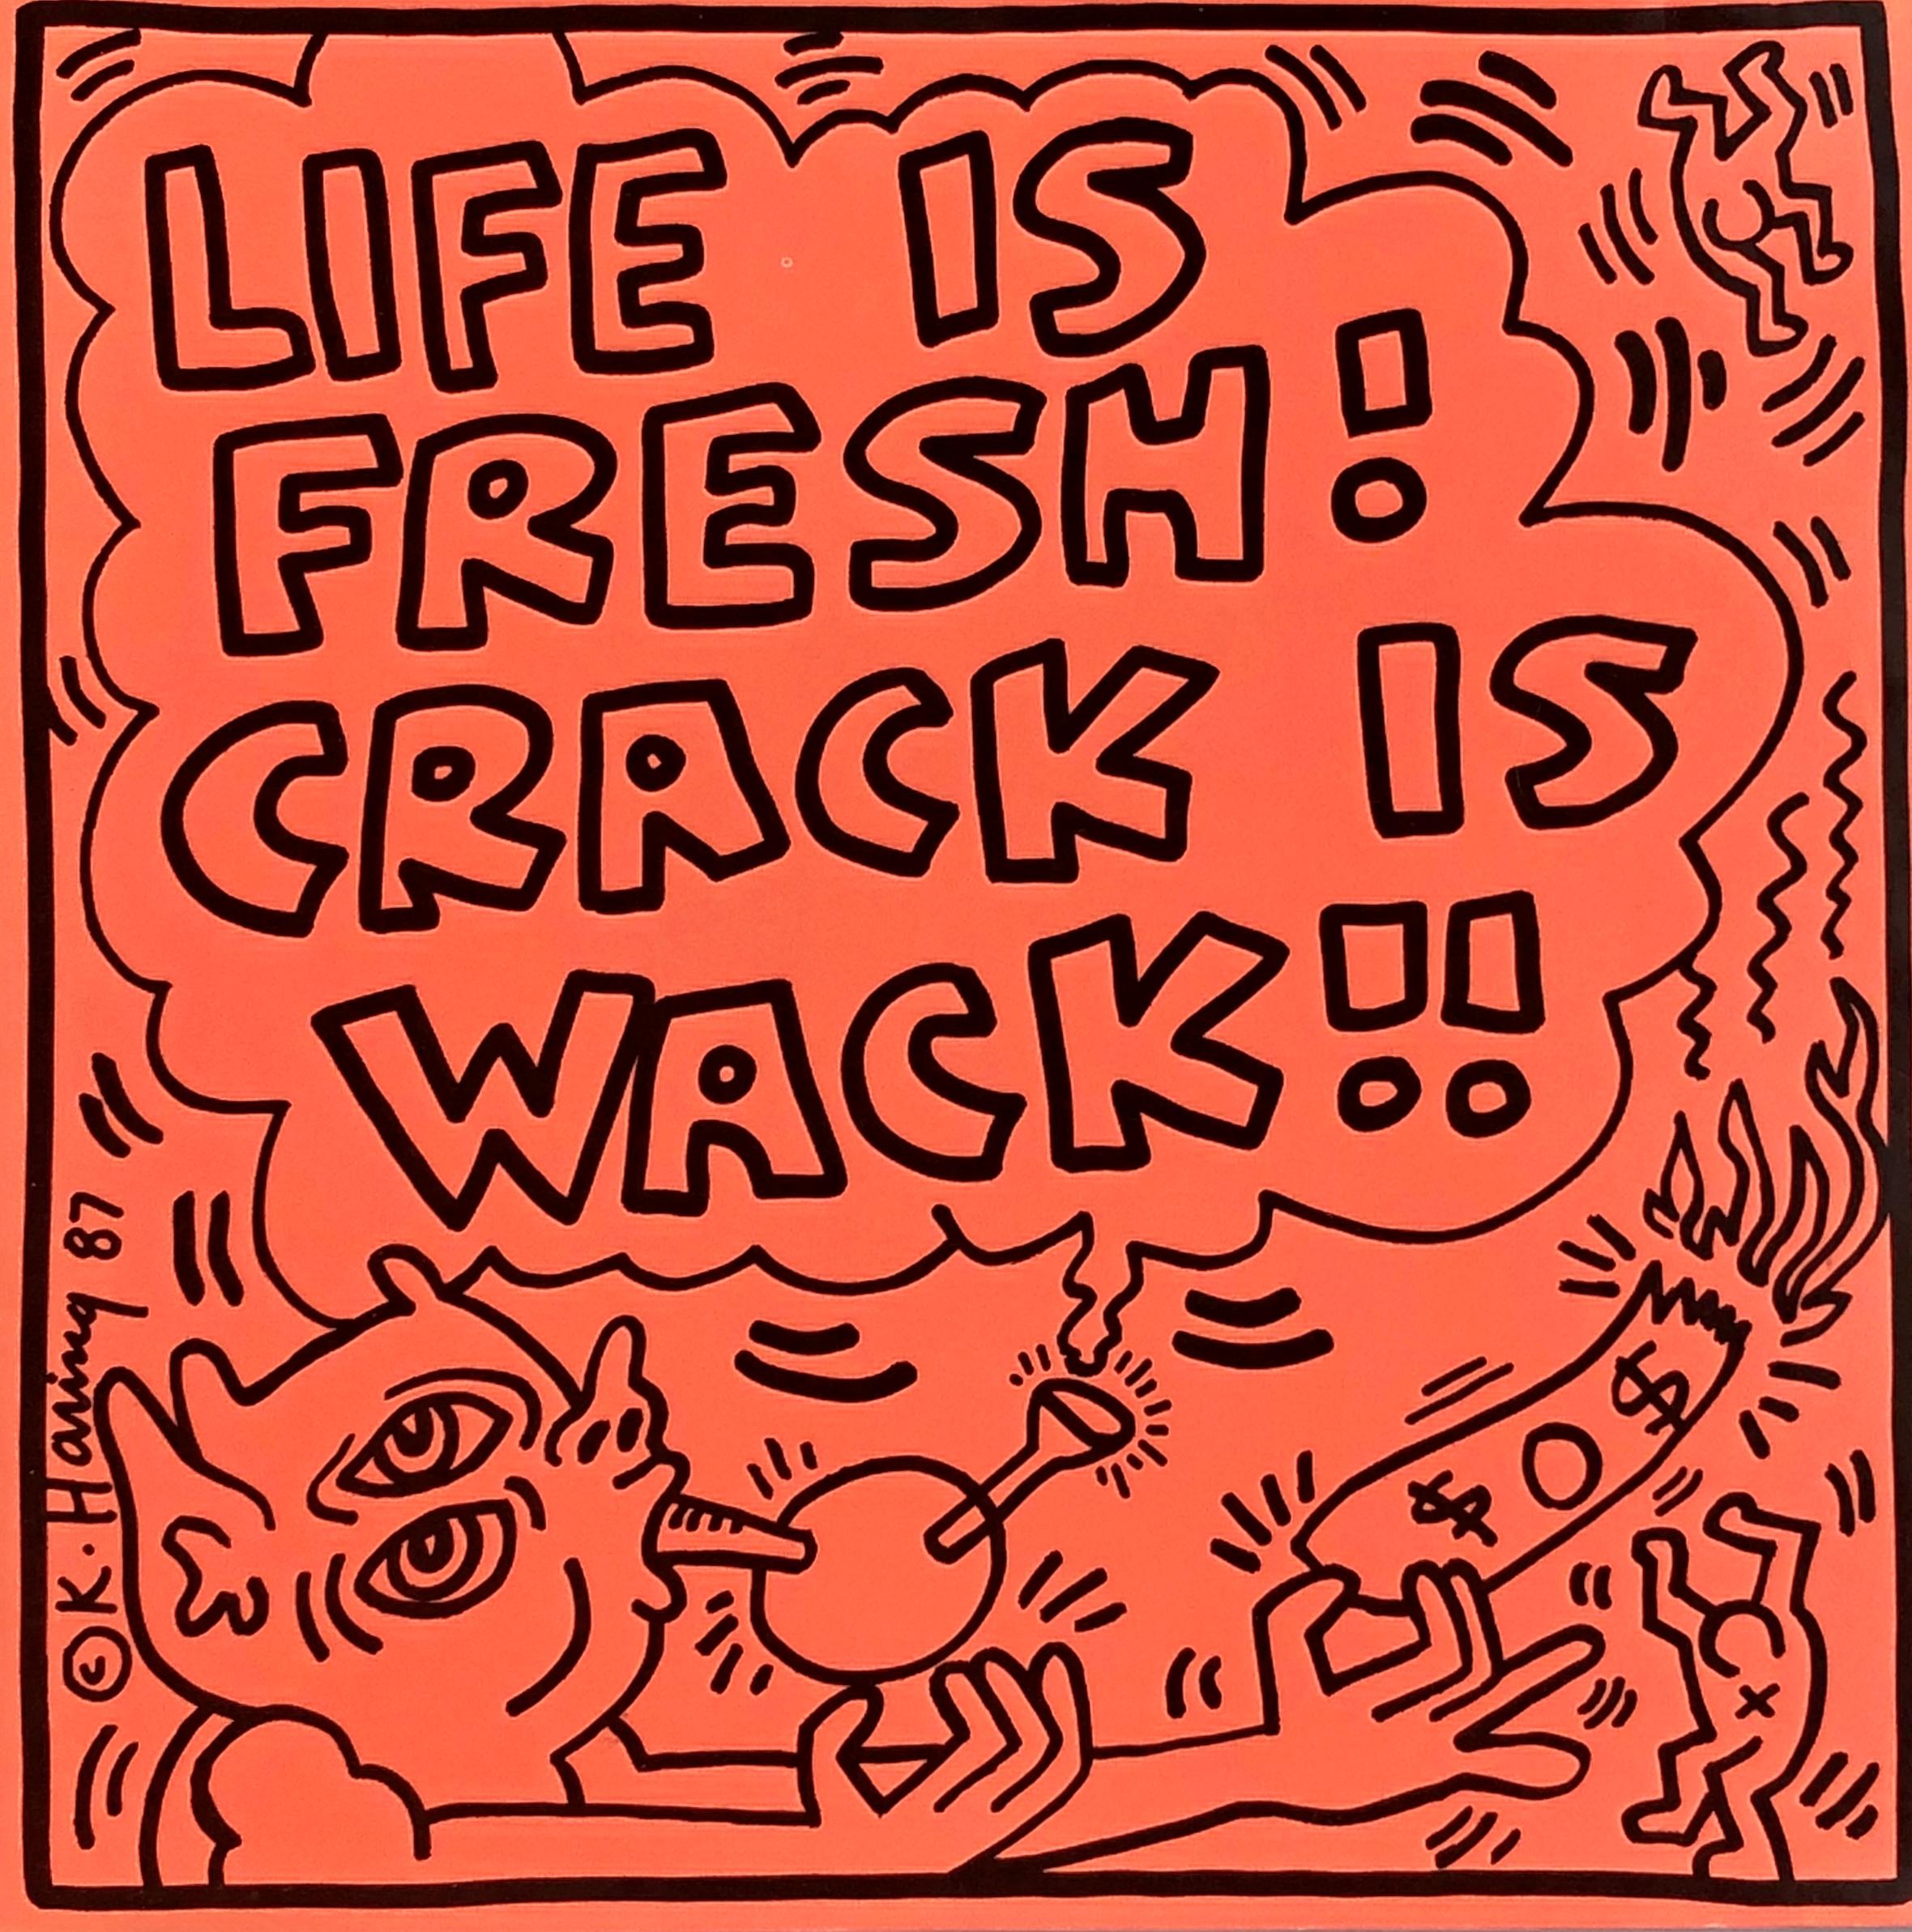 Keith Haring “Life is Fresh! Crack Is Wack!” 1987
Rare highly sought-after 1980s record album featuring original artwork by Keith Haring. Among the most difficult to find of Keith Haring record illustrations. 

Haring's cover illustration here for